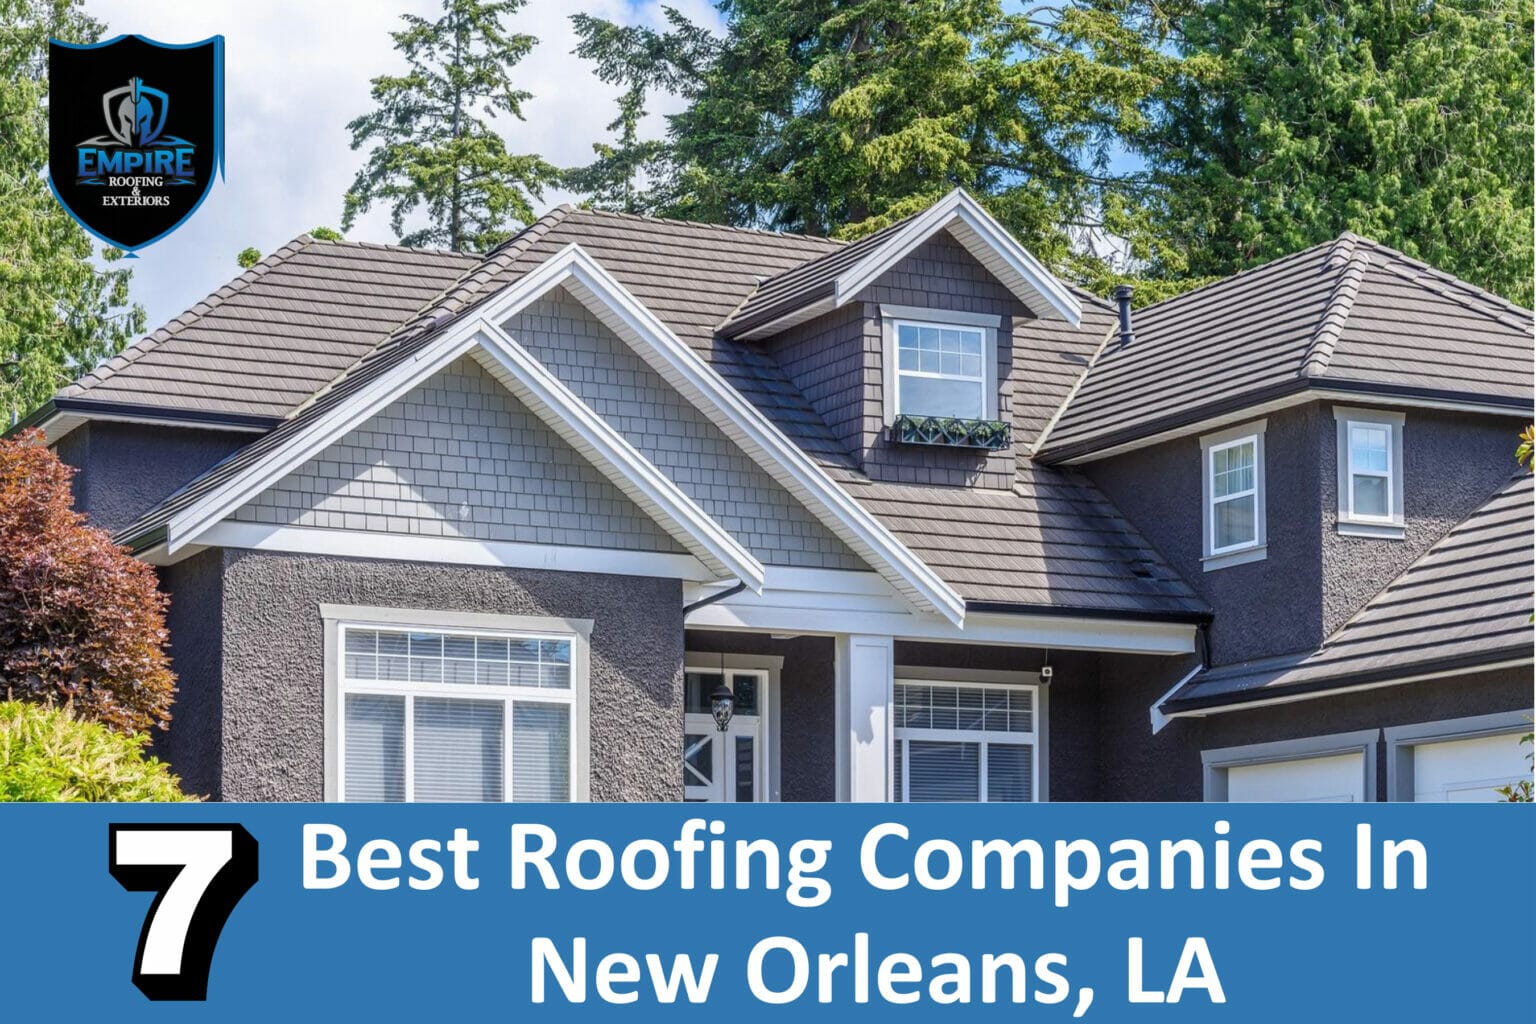 The 7 Best Roofing Companies In New Orleans, LA